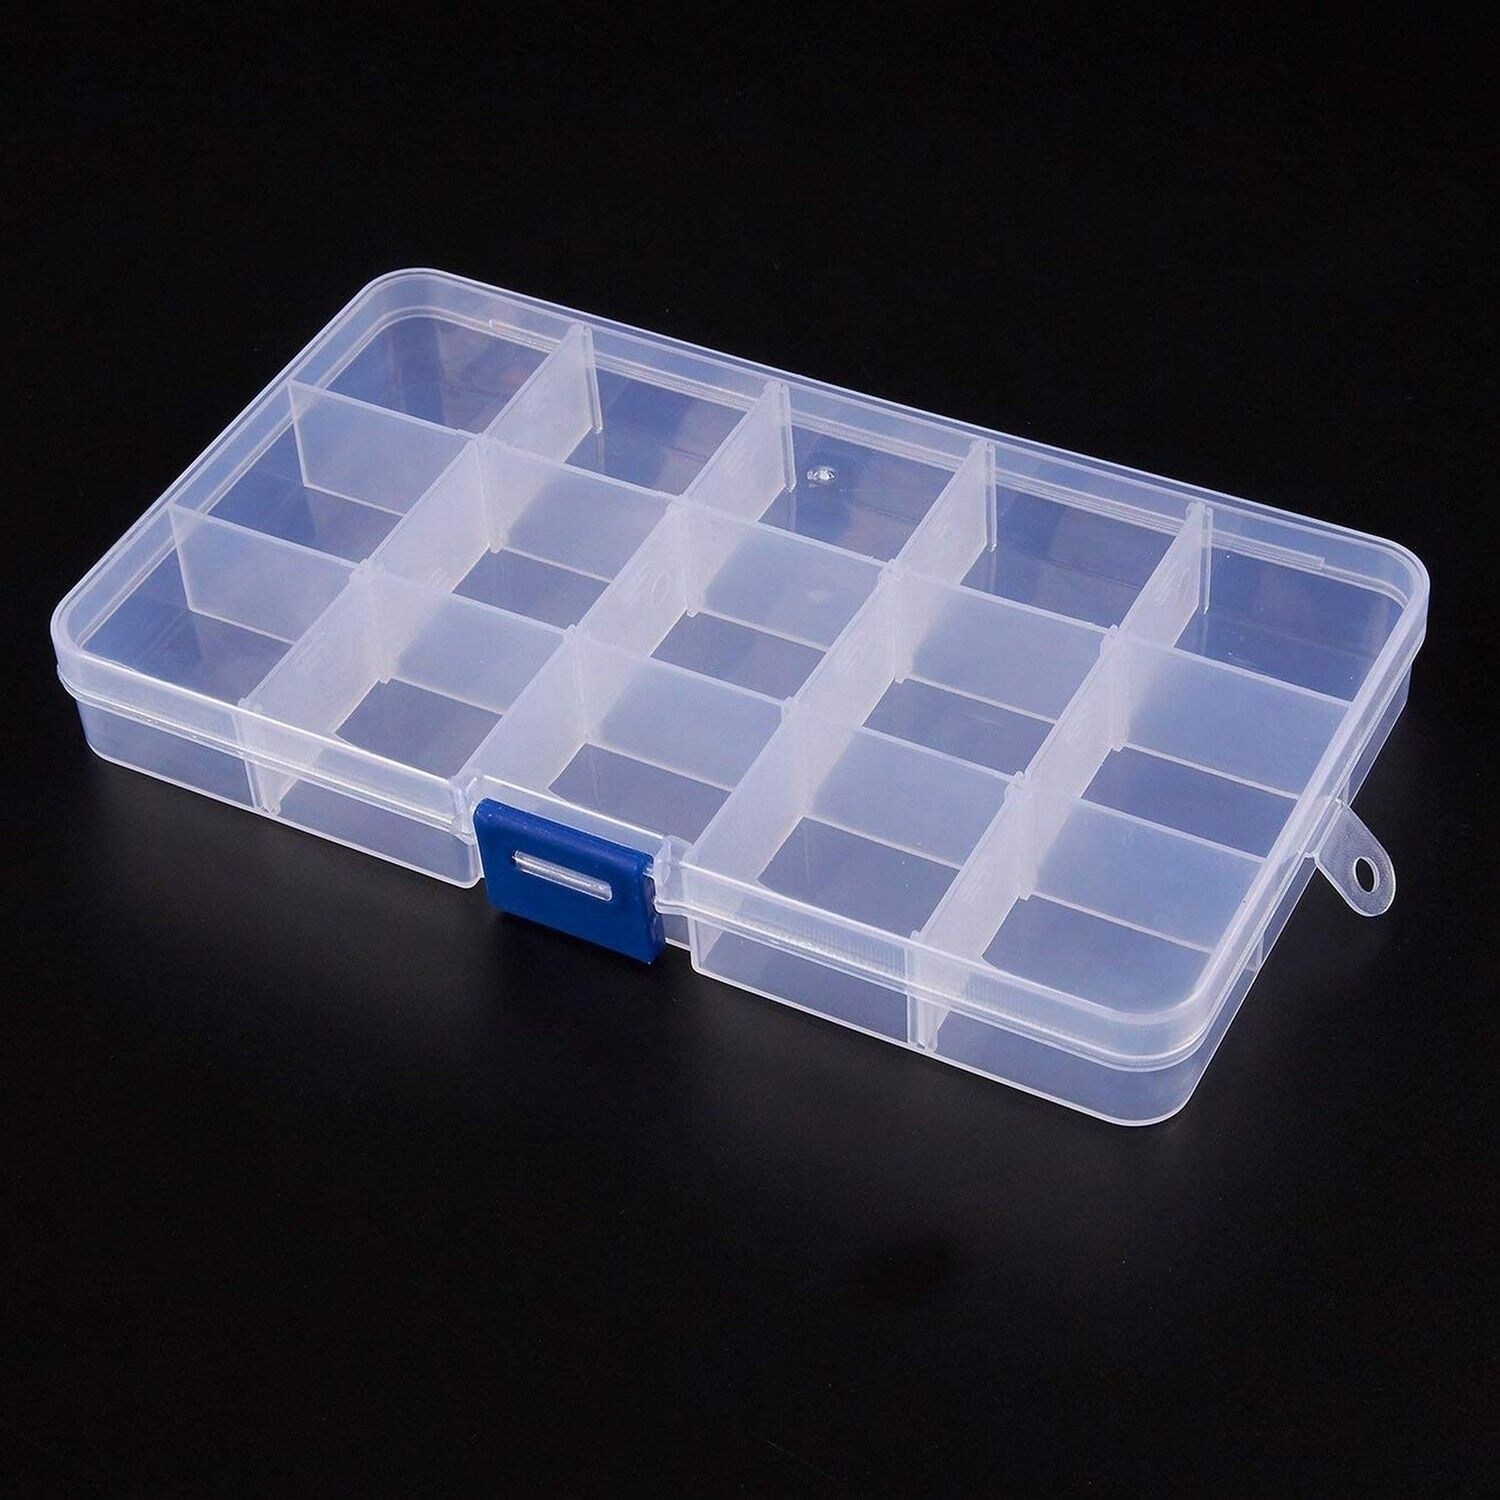 Organizer box, clear, 11x6x2-inches with 15 compartments. Sold  individually. - Fire Mountain Gems and Beads